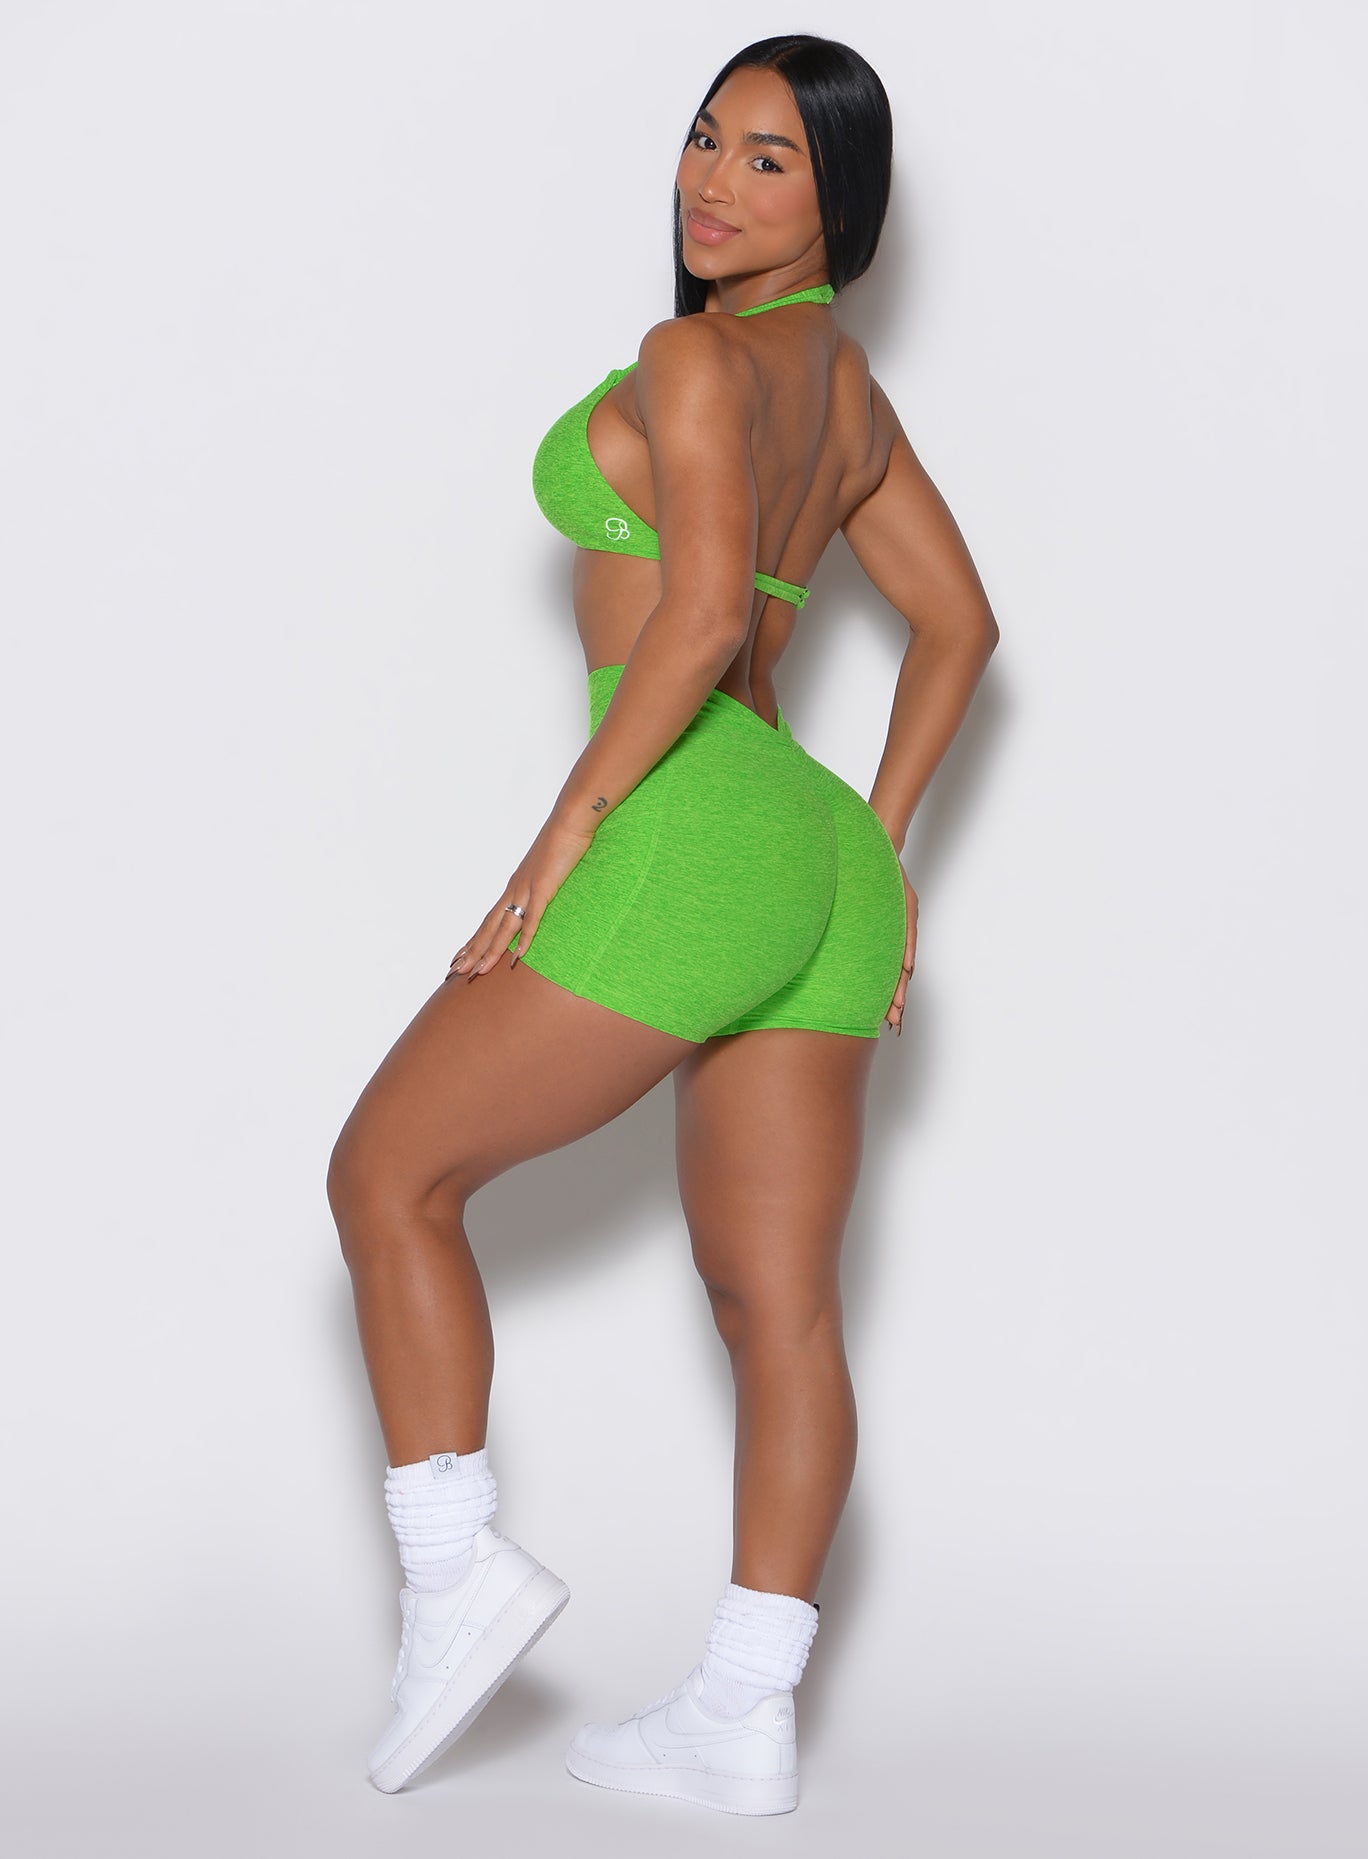 left side profile view of a model wearing our V back shorts in Neon Lime Green color along with the matching bra